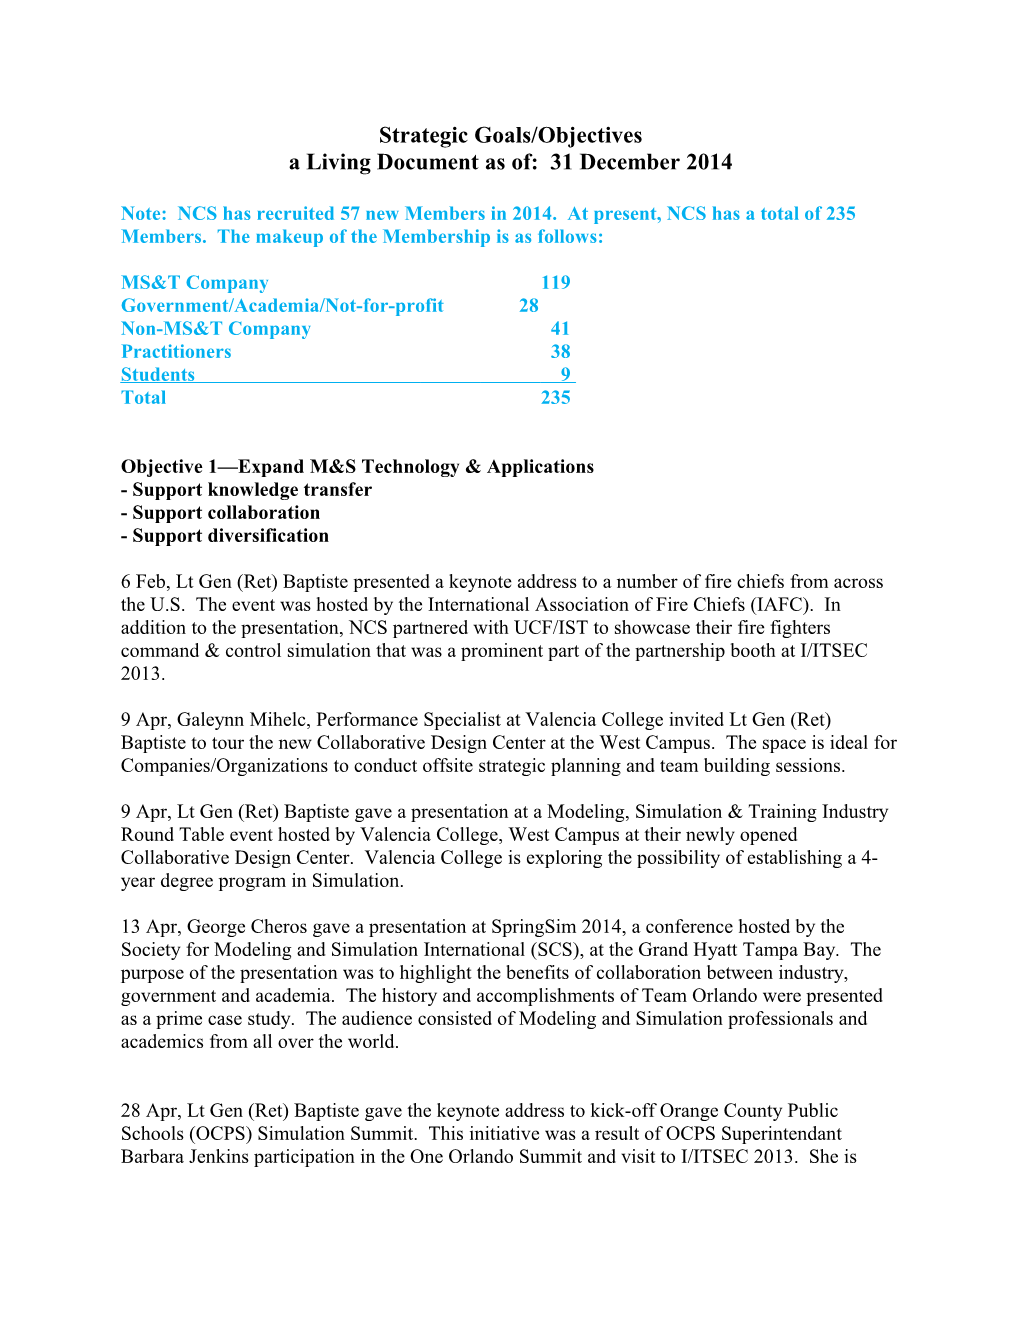 Strategic Goals/Objectives a Living Document As Of: 31 December 2014